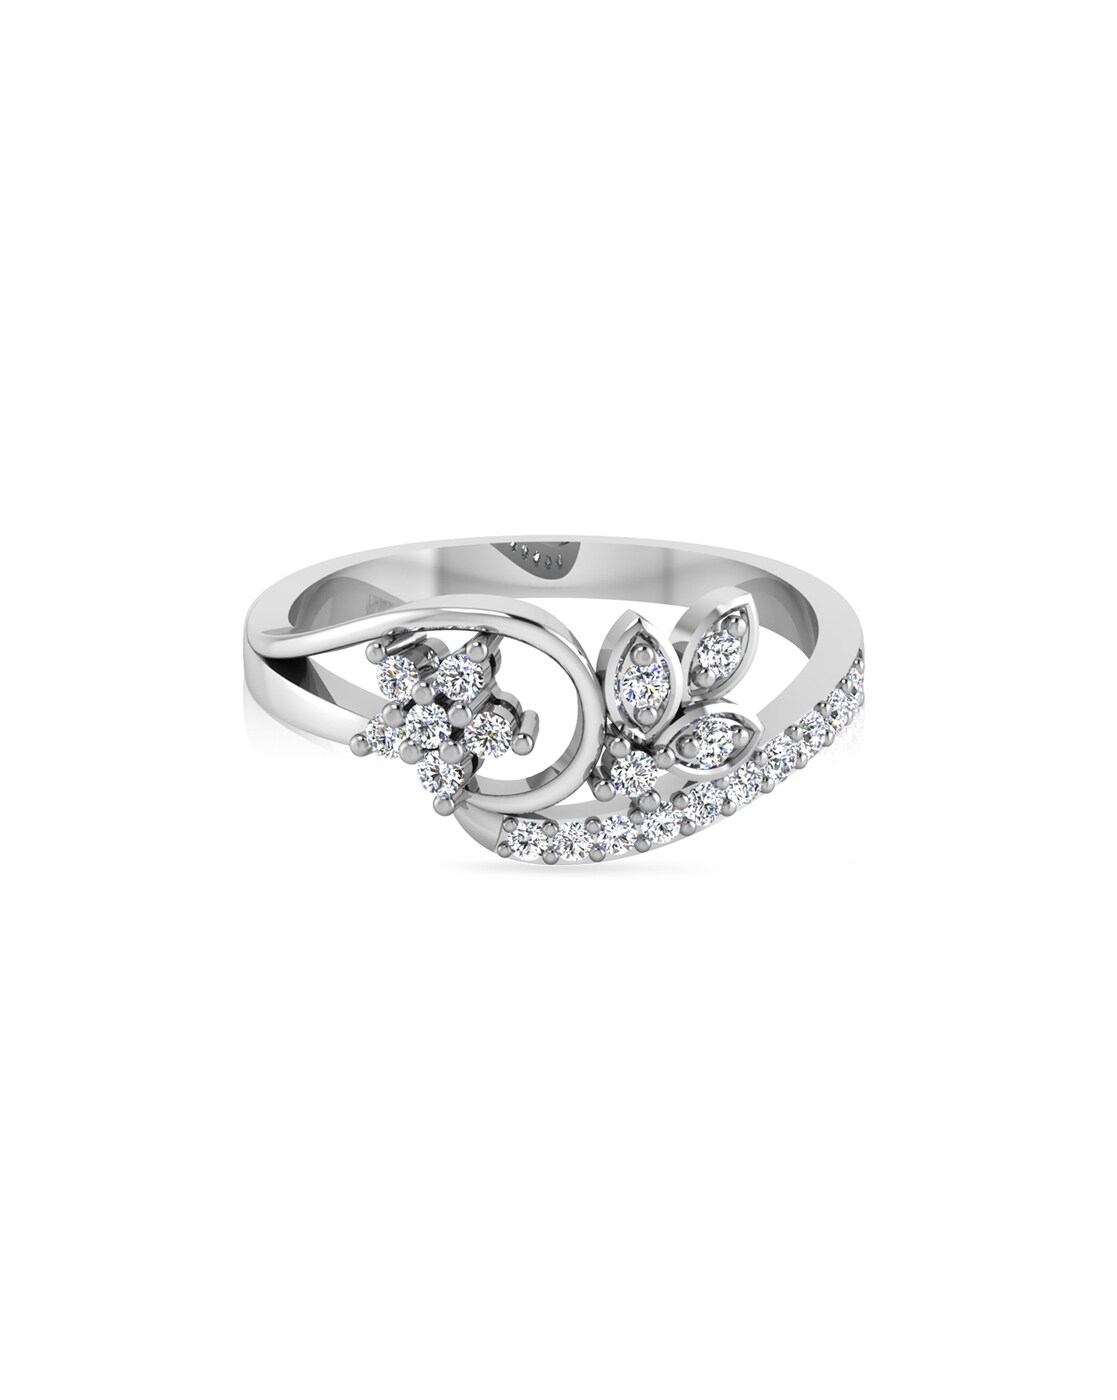 1 ct Diamond Solitaire Engagement Ring 14k White Gold